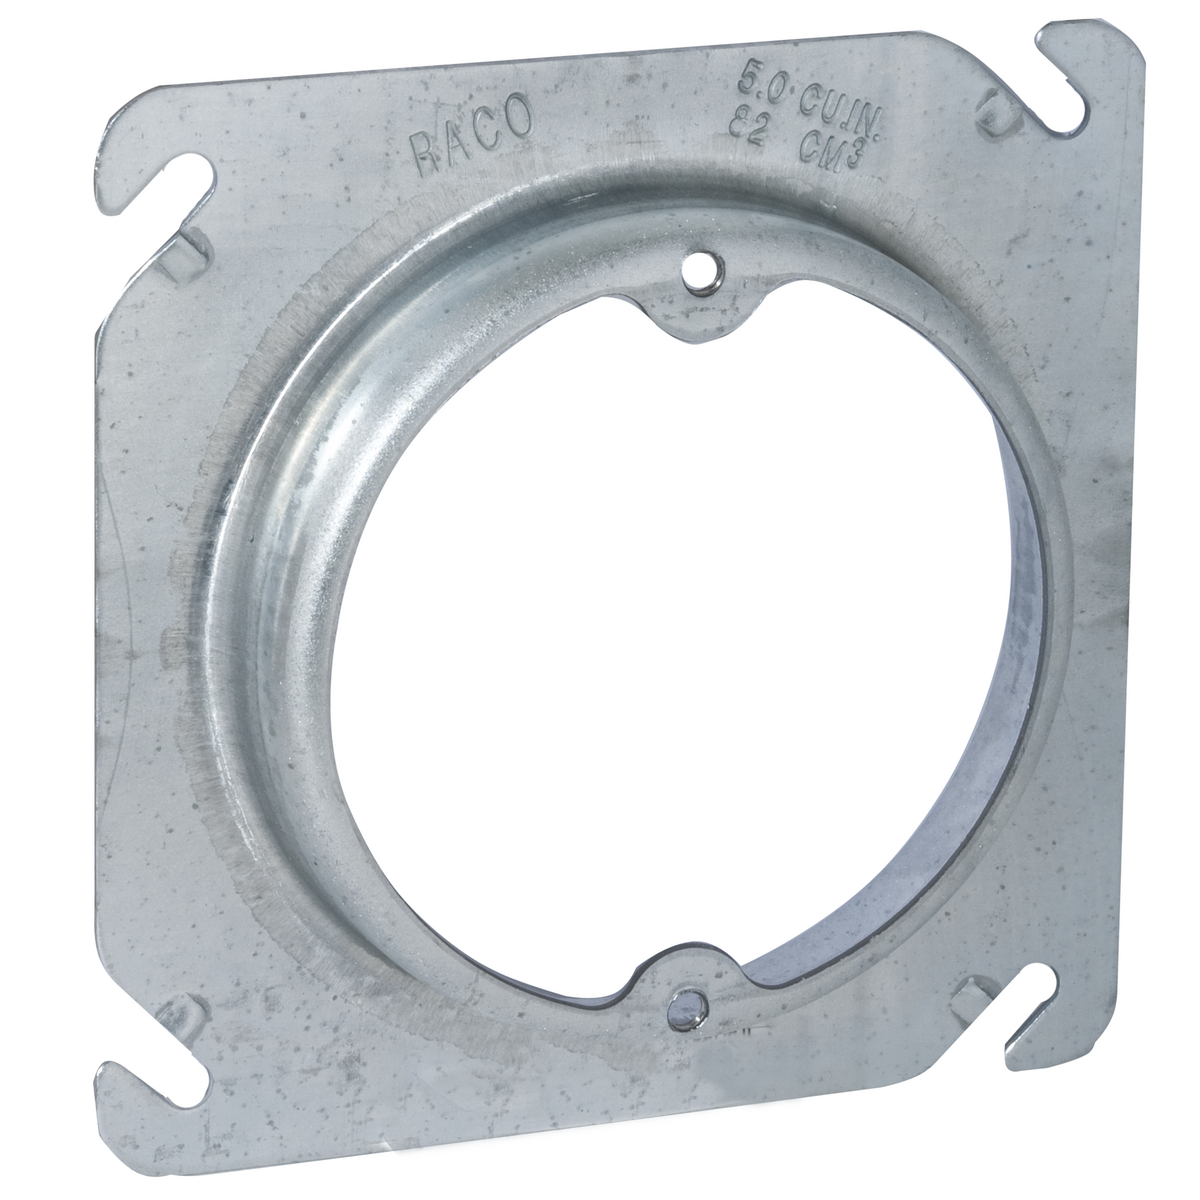 RACO 759 4" SQUARE BOX FIXTURE COVER, SQUARE TO ROUND RAISED 3/4", EARS 2-3/4" O.C.